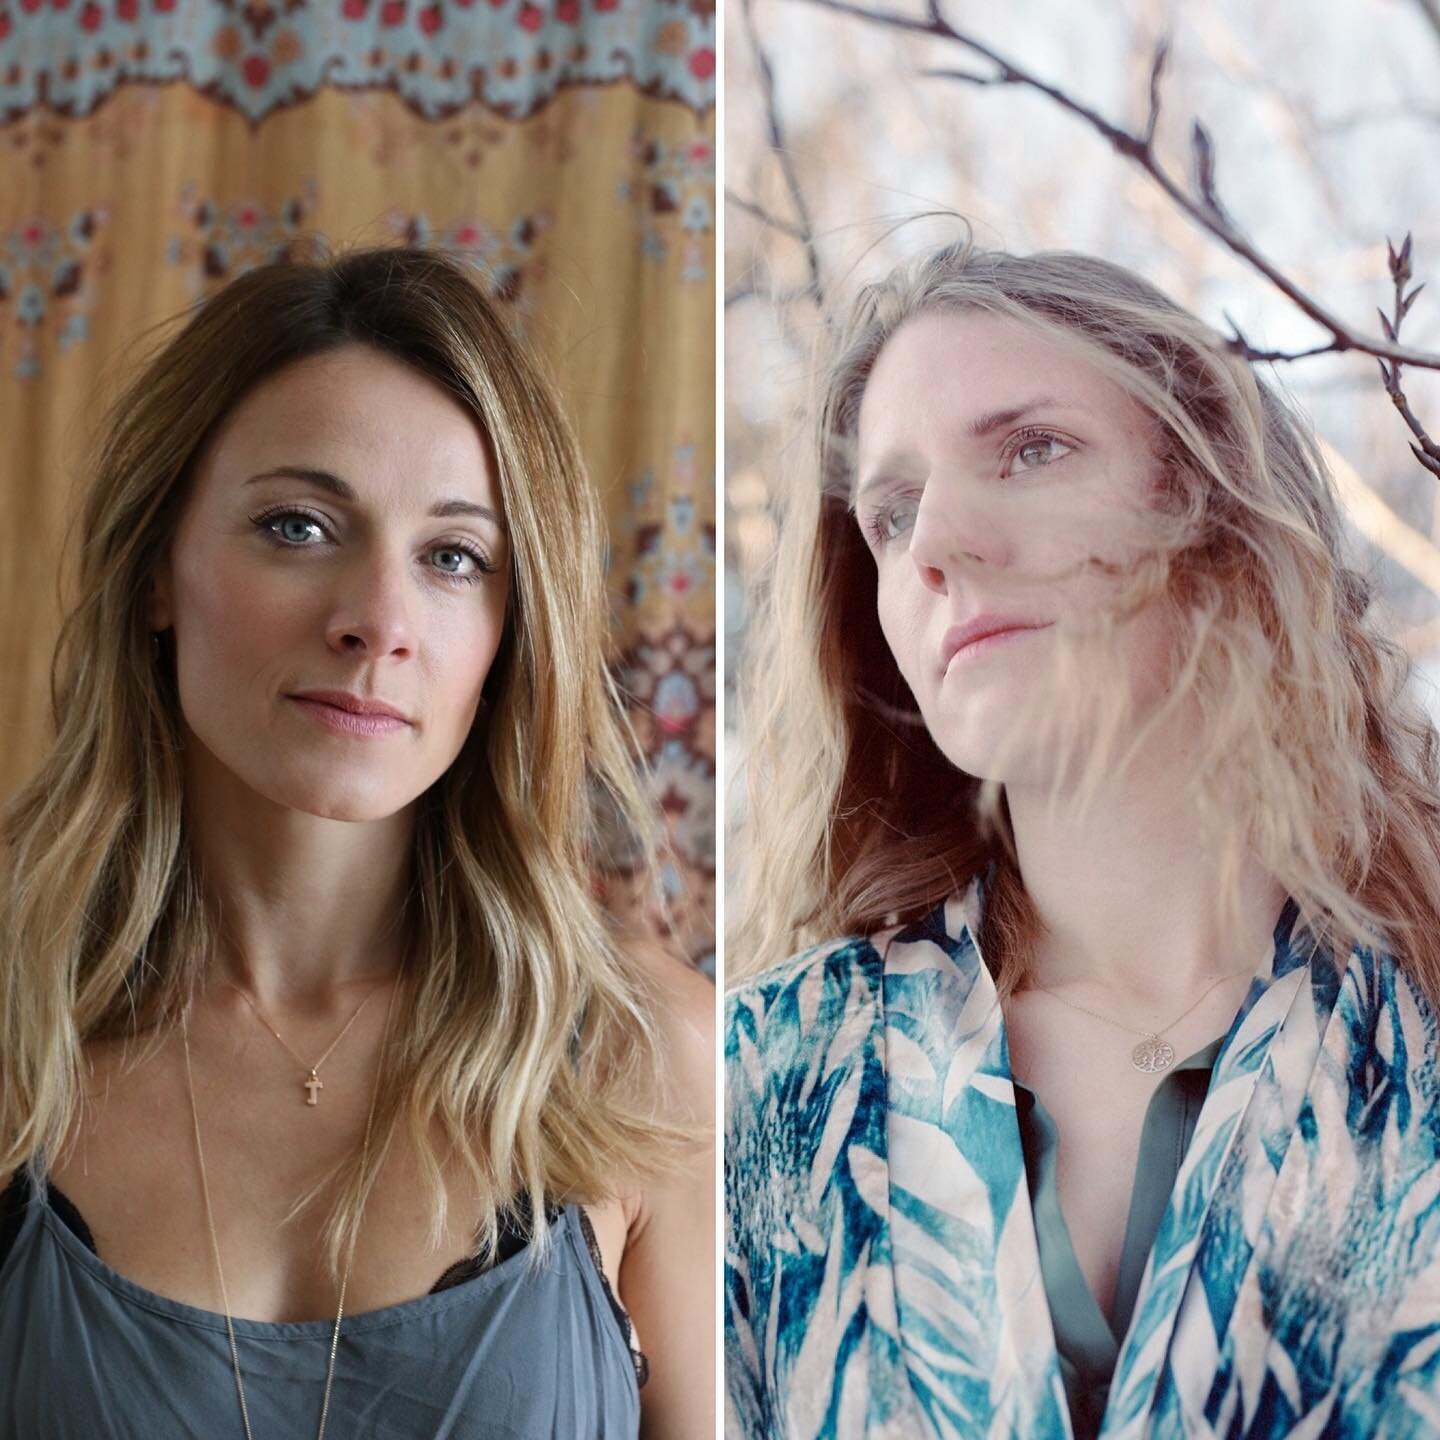 Tonight,to close this series of conversations,I am speaking with my sister Charley Webb + Markéta Irglová, two women who inspire and influence me greatly.💙🦋We go live at about 7pm UK time. Read on to hear about these two incredible artists. #conv